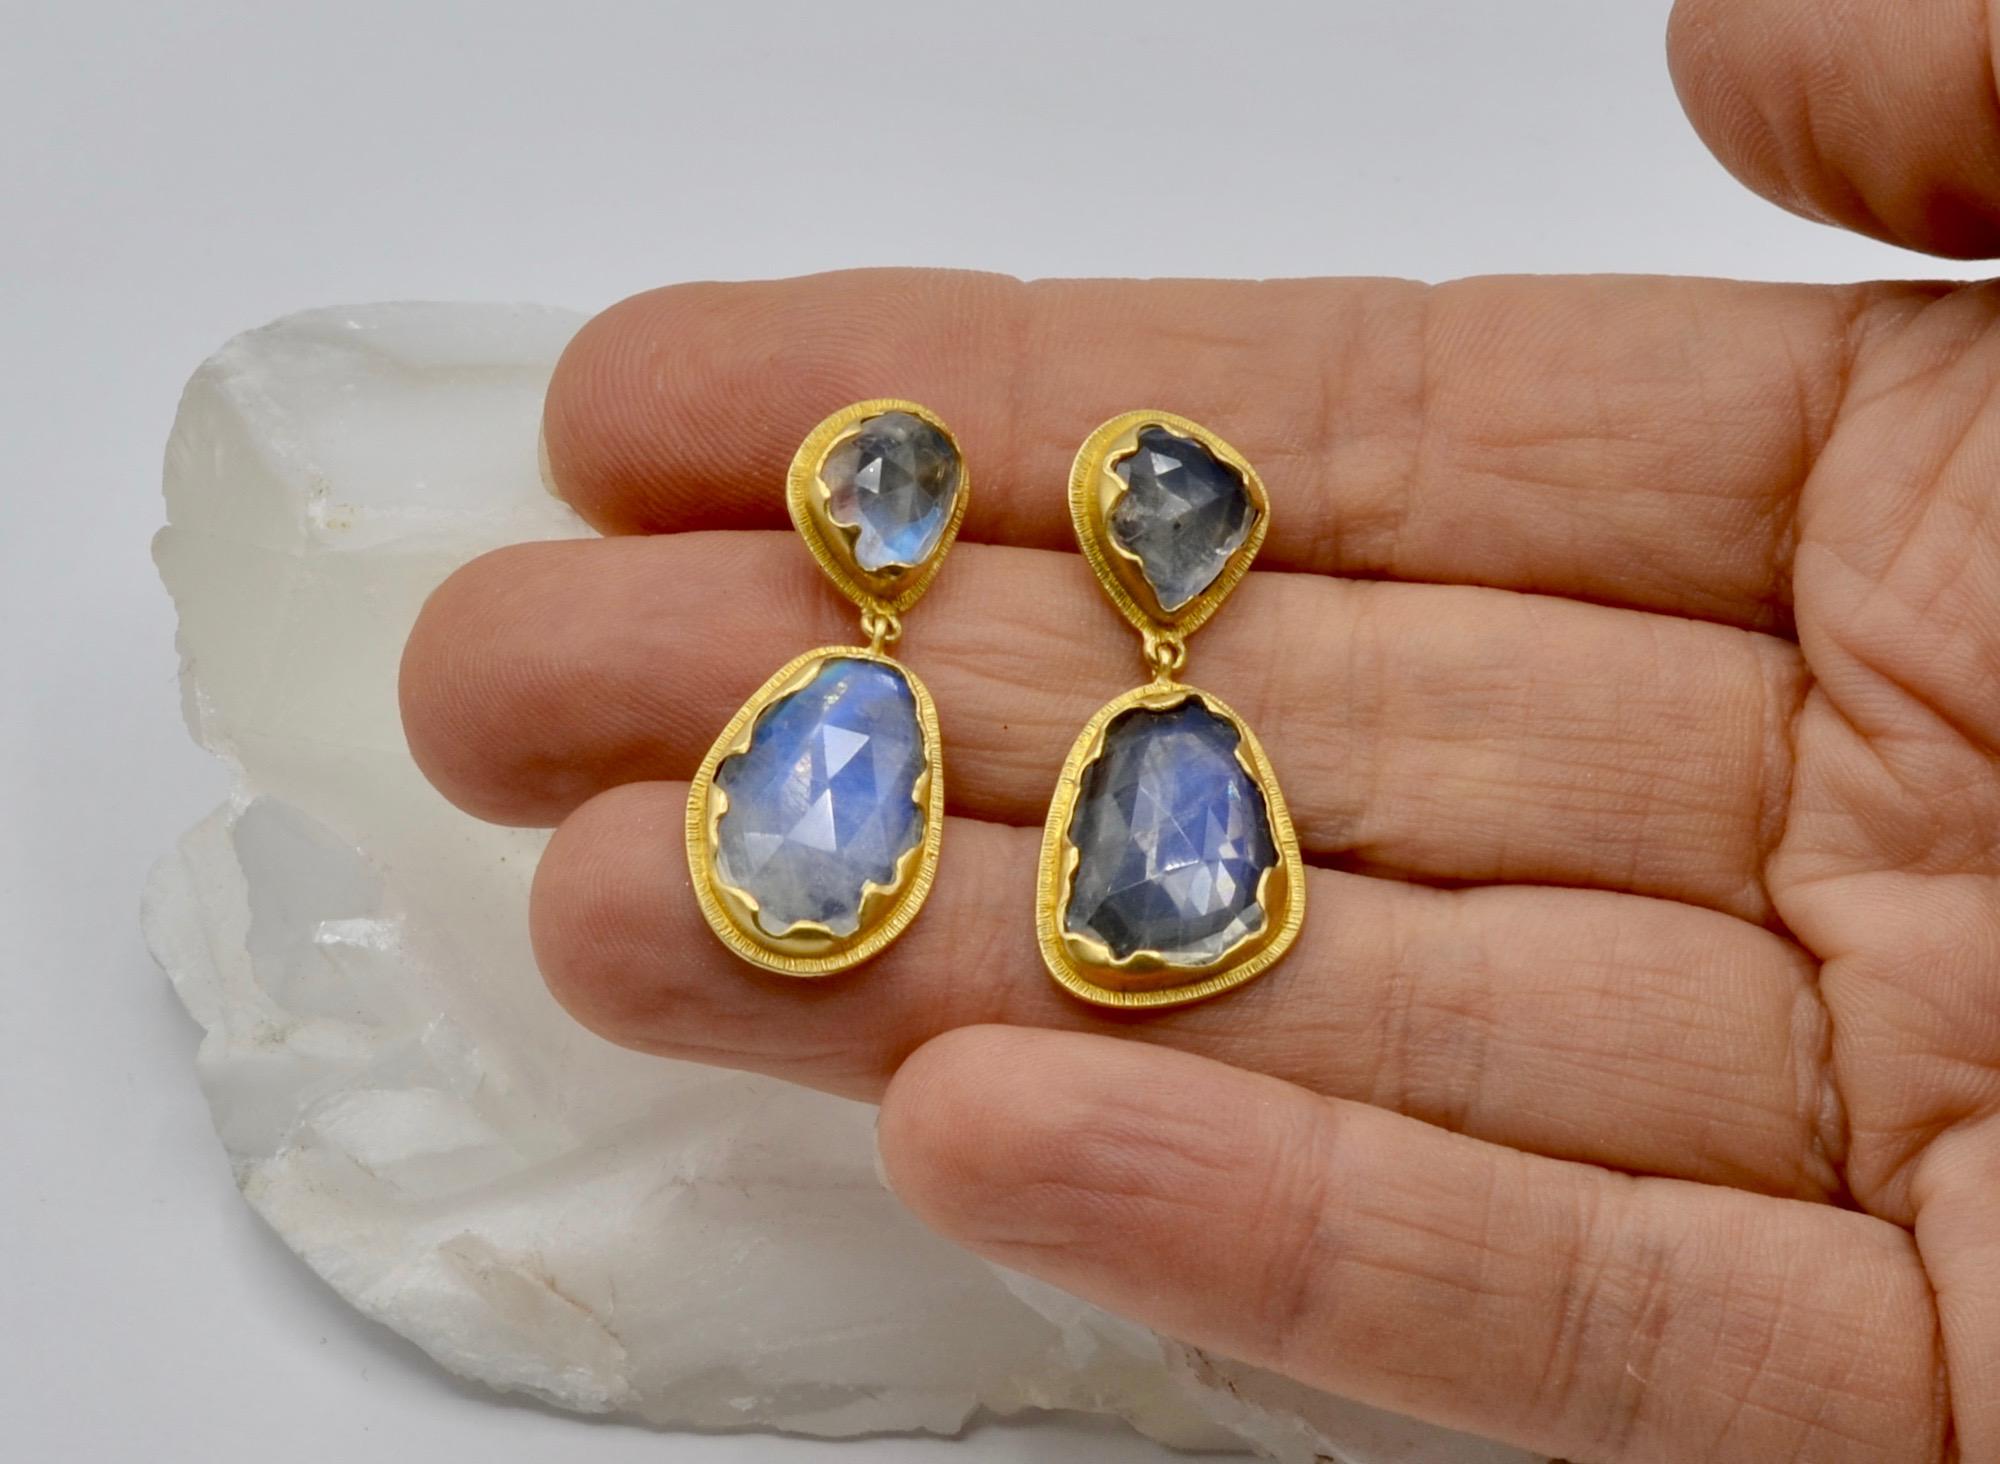 These mesmerizing Steven Battelle designed rose cut 15 carat total weight moonstones are set in a' torn paper' edge 18 karat gold setting .The moonstones are full of multicolor rainbows that catch the light on the rose cut surface. These are